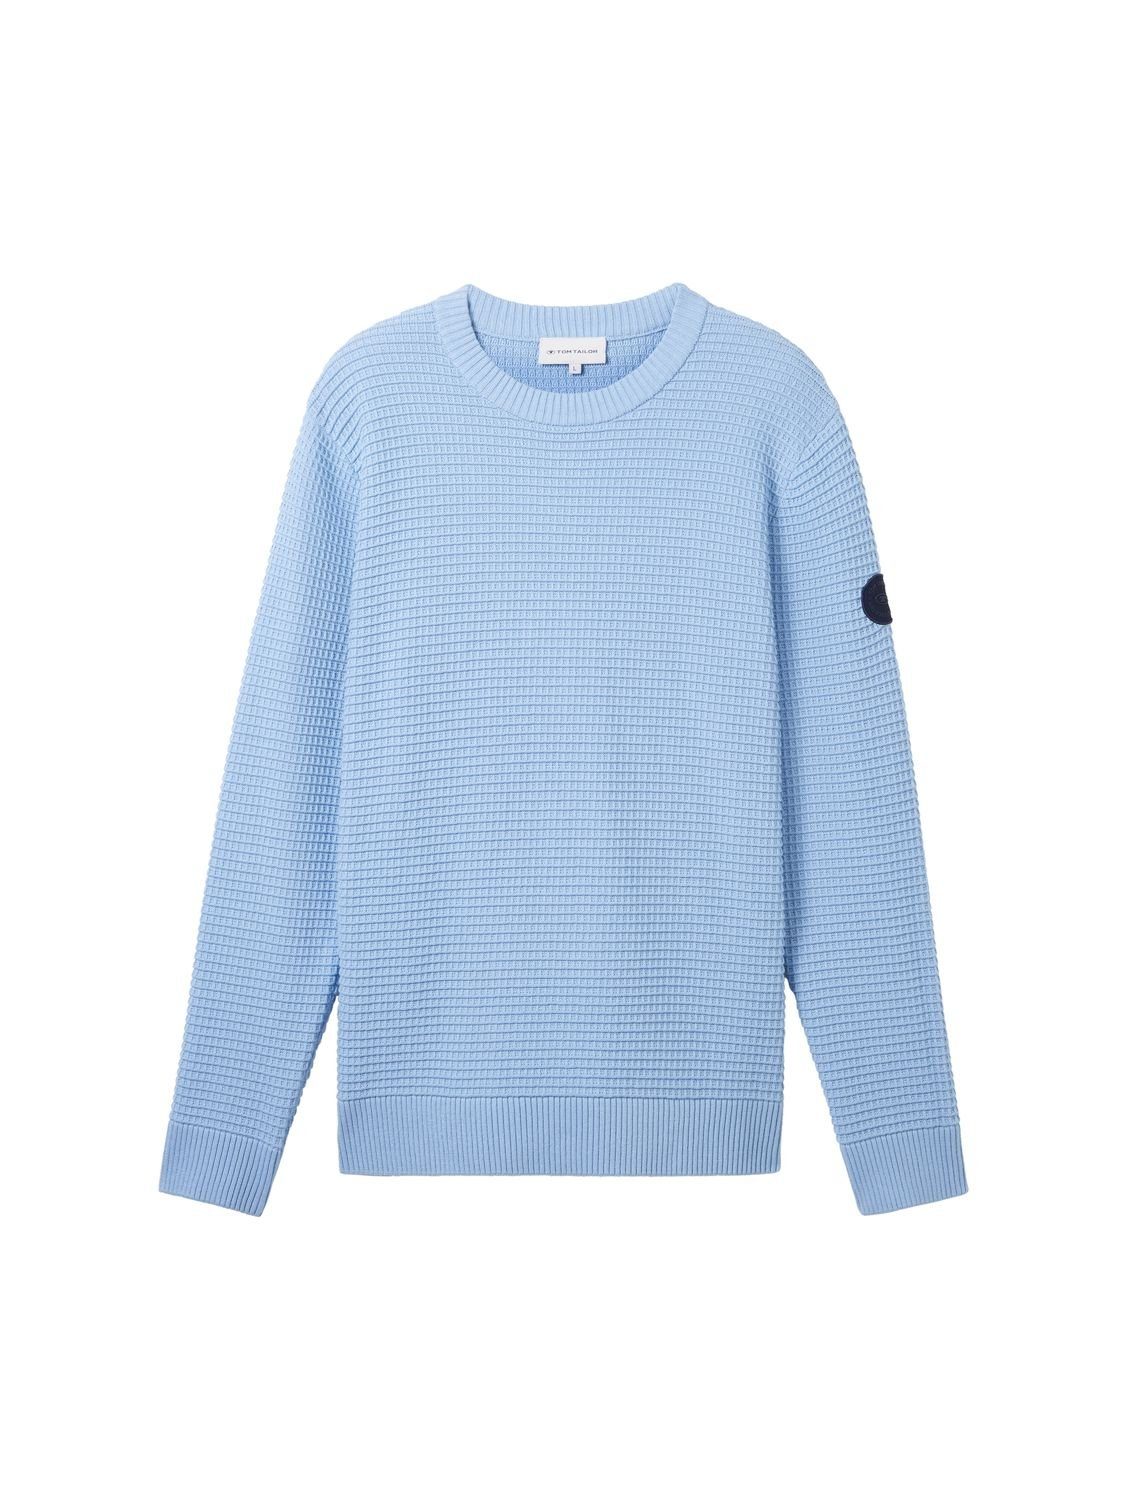 STRUCTURED 32245 TOM Washed TAILOR KNIT Out Blue Baumwolle Strickpullover Middle aus CREWNECK